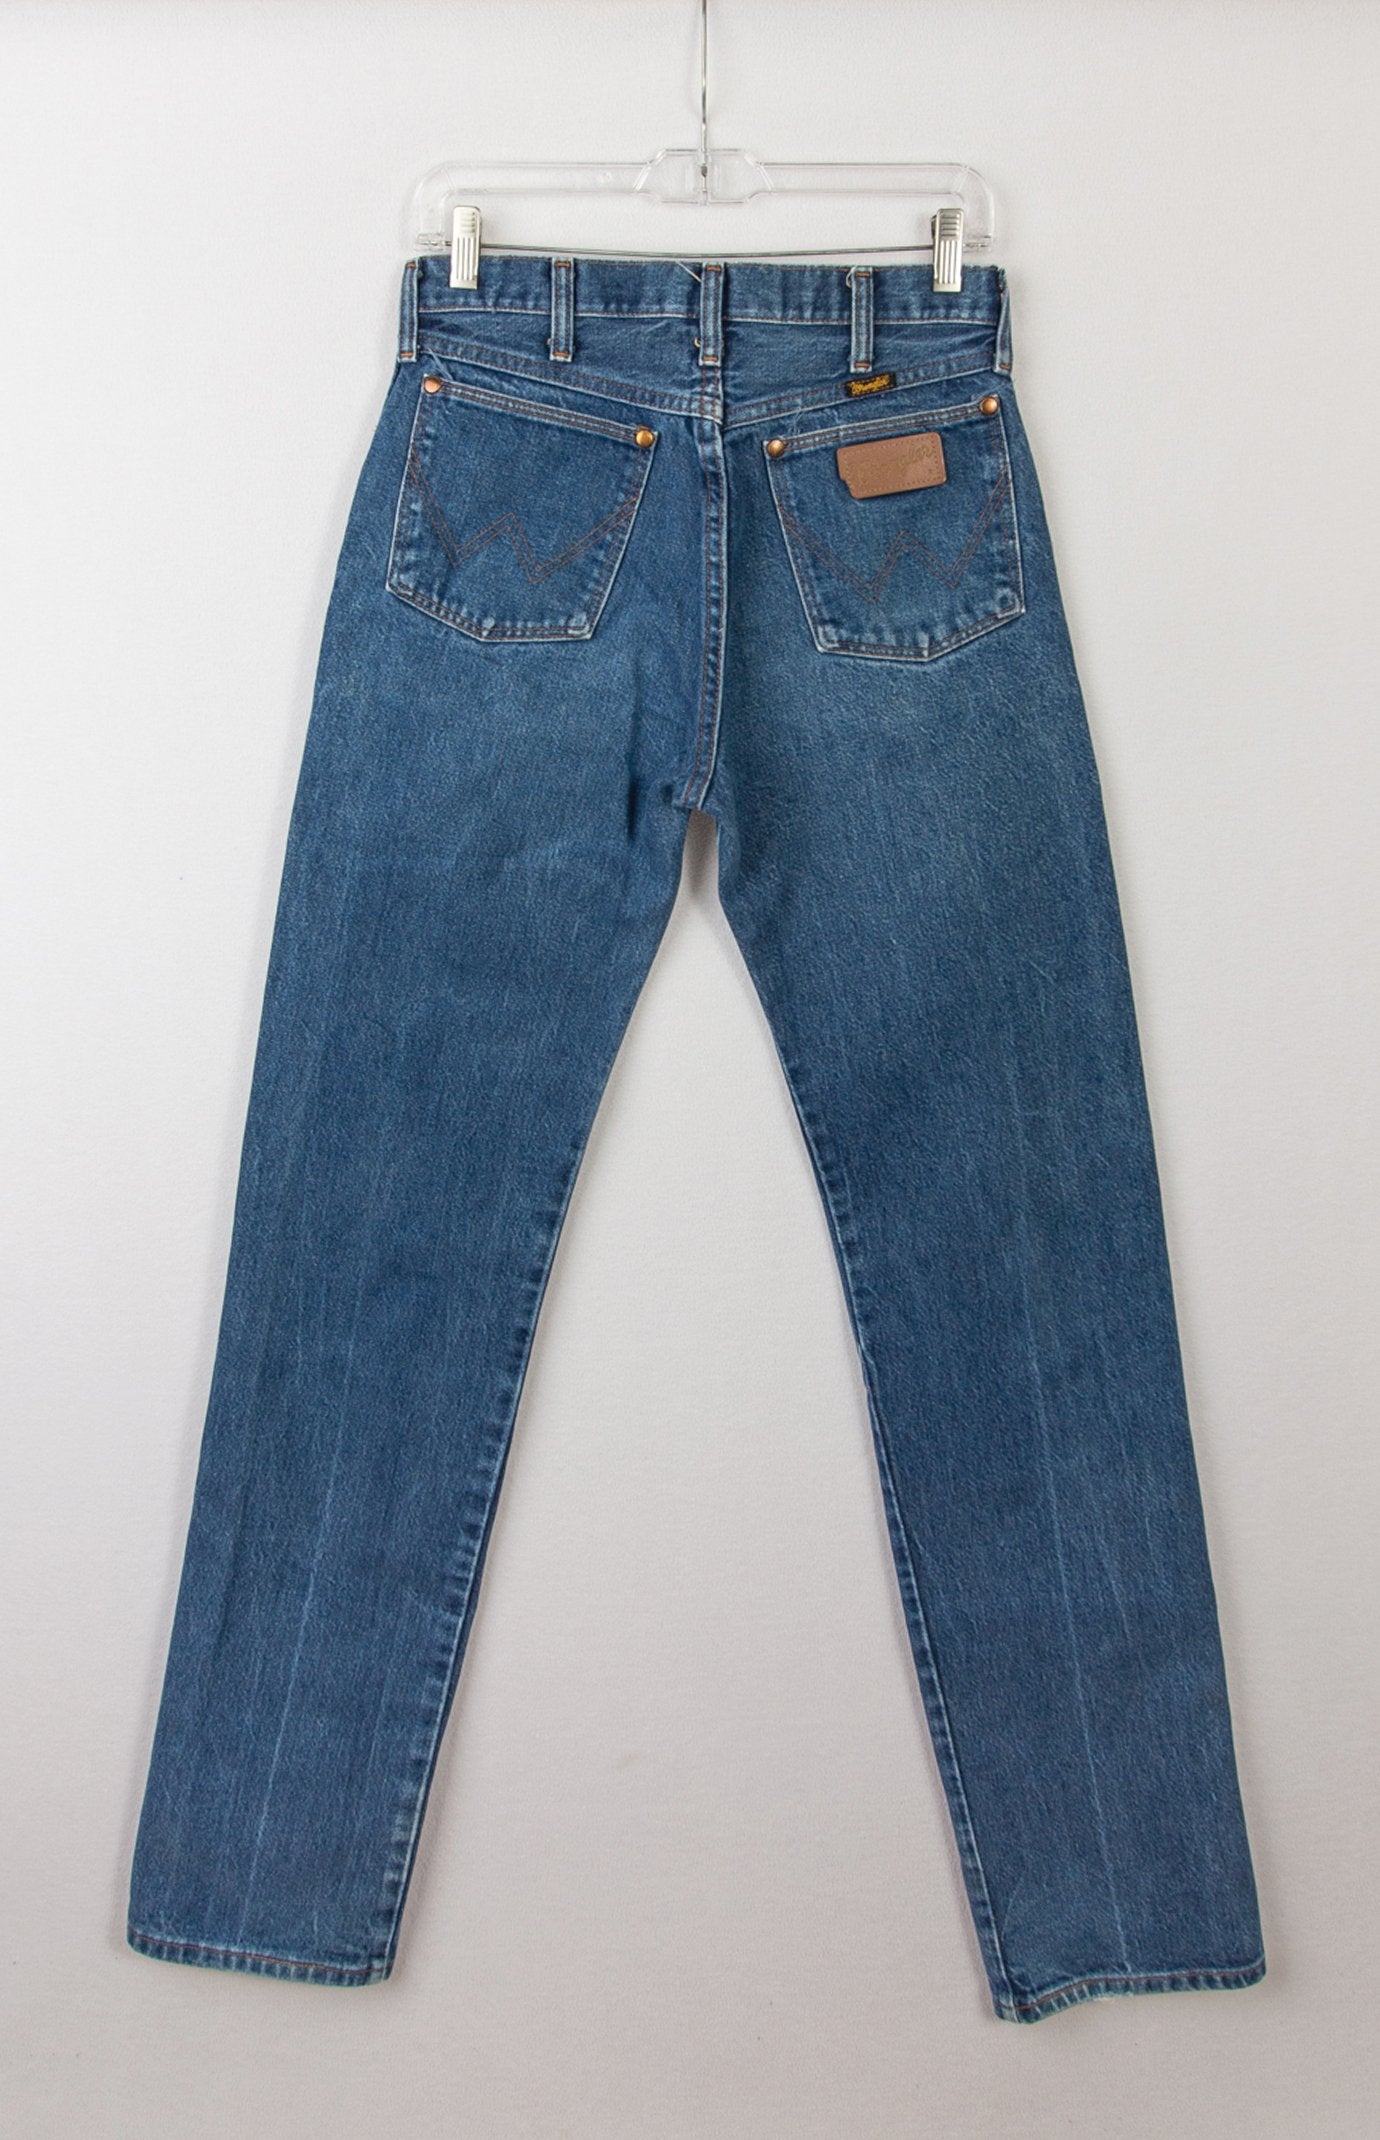 Denim Jeans Online | Free Delivery and Returns